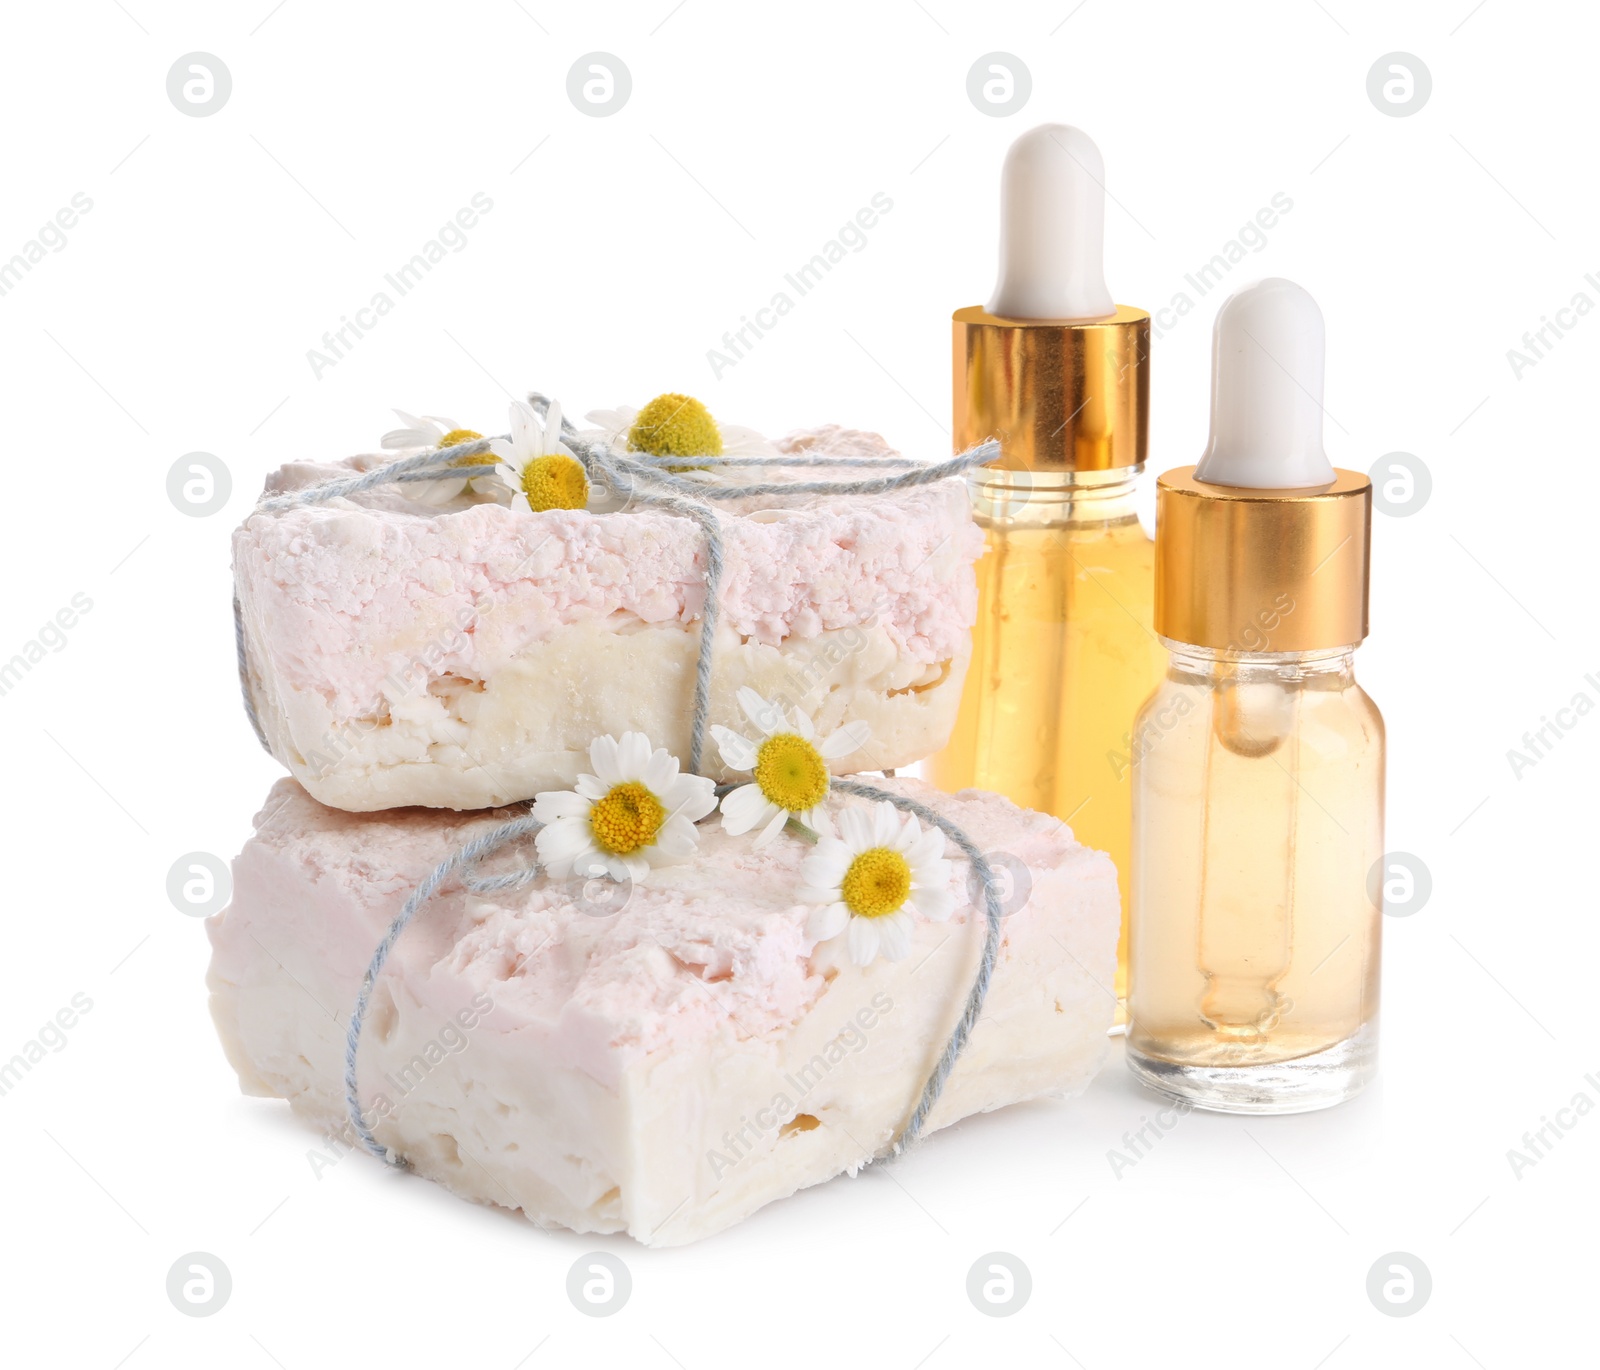 Photo of Chamomile flowers, soap bars and cosmetic products on white background